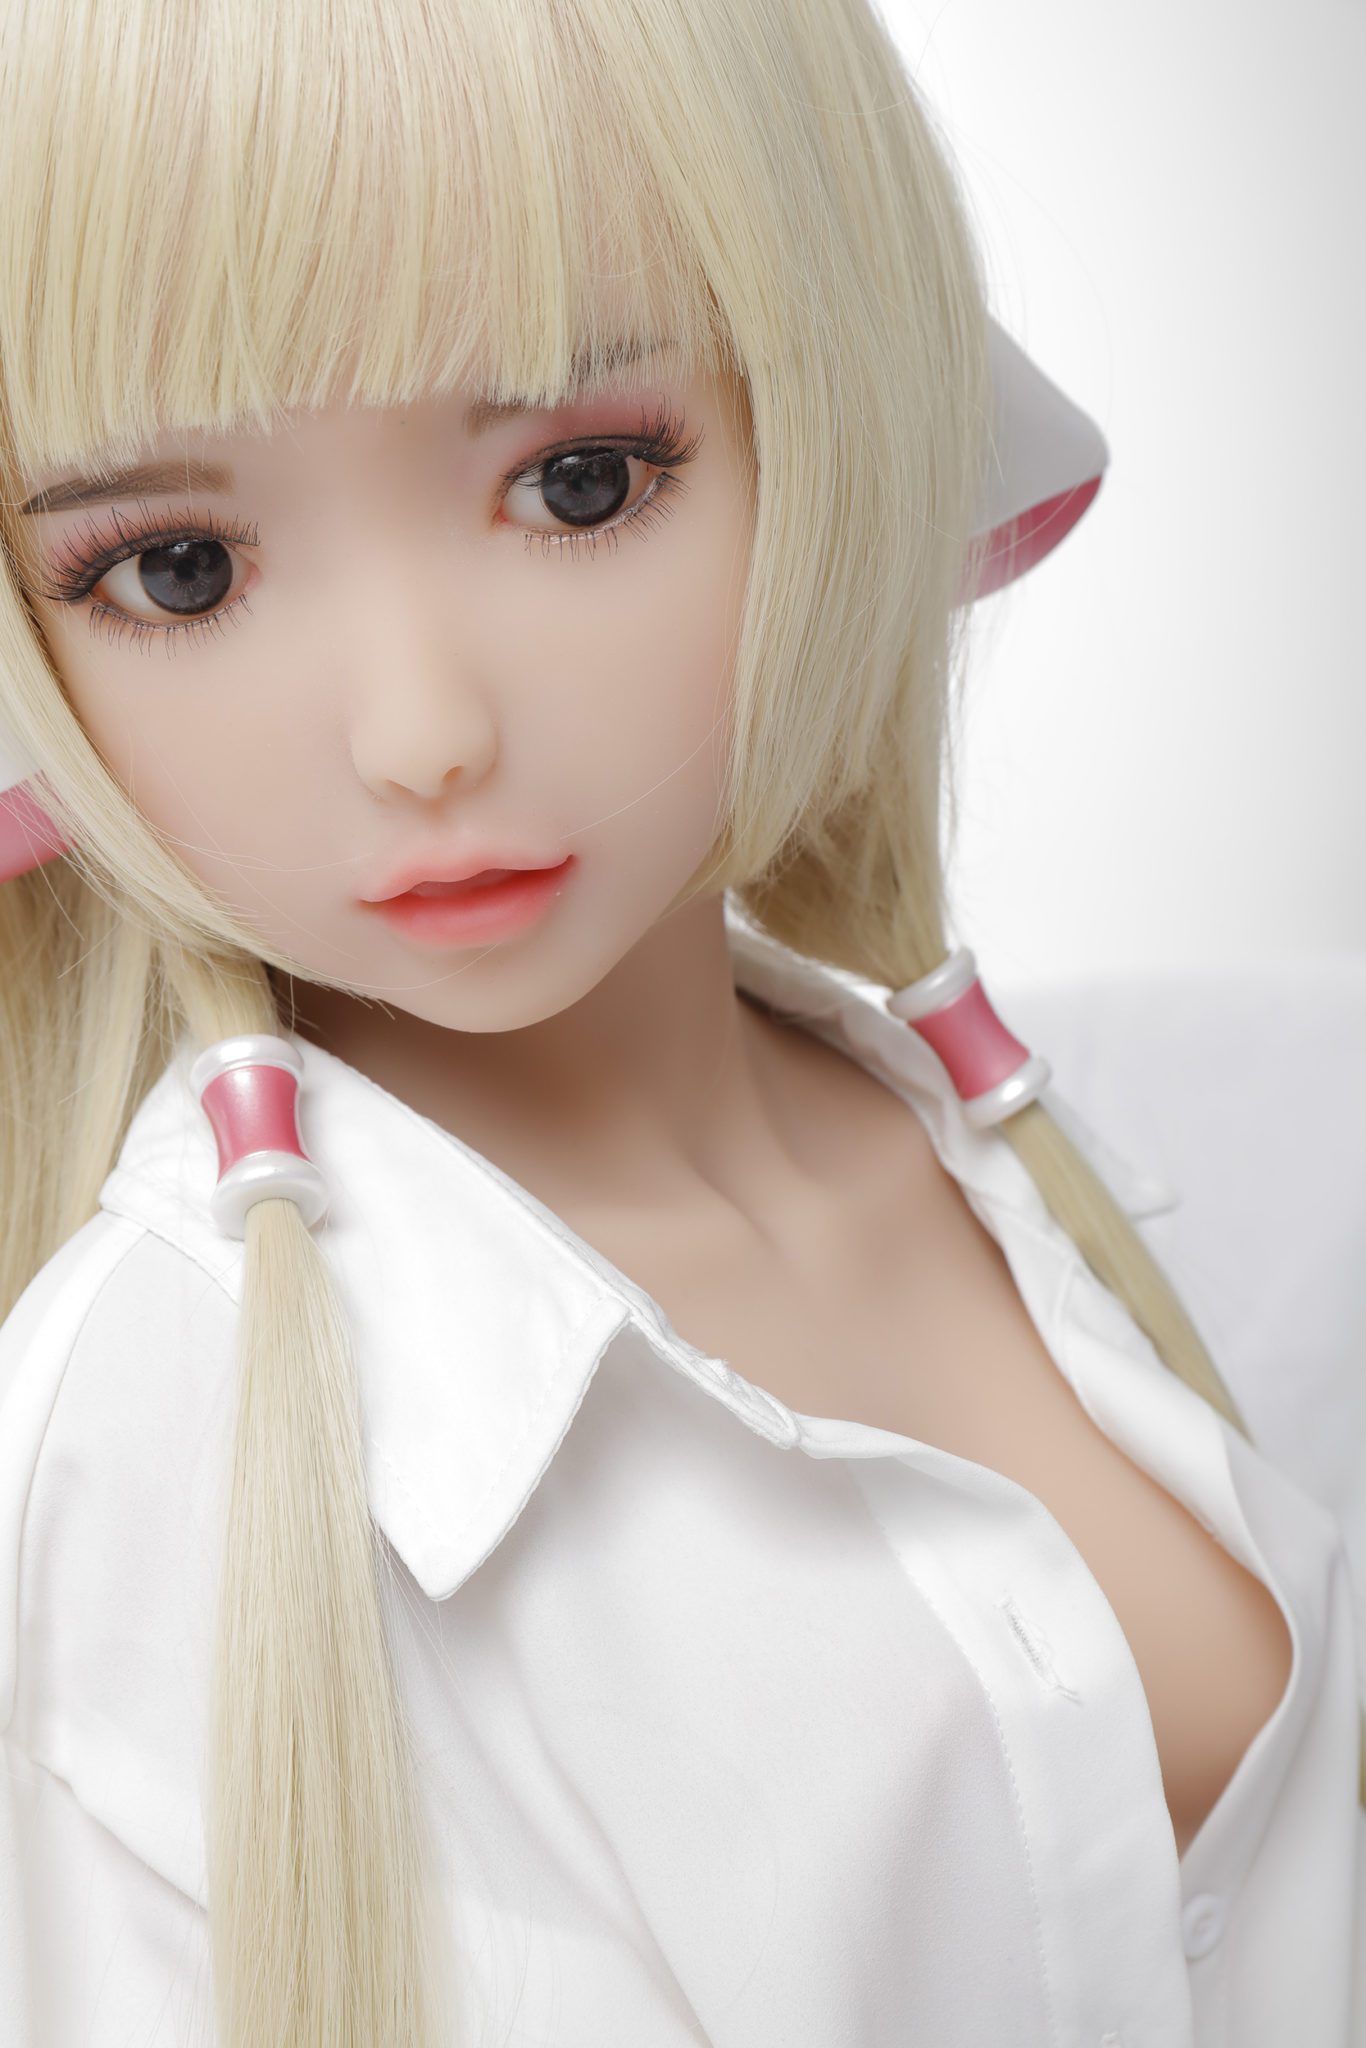 Chi Cutie Sex Doll 3′ 11 120cm Cup B Ainidoll Online Shop For